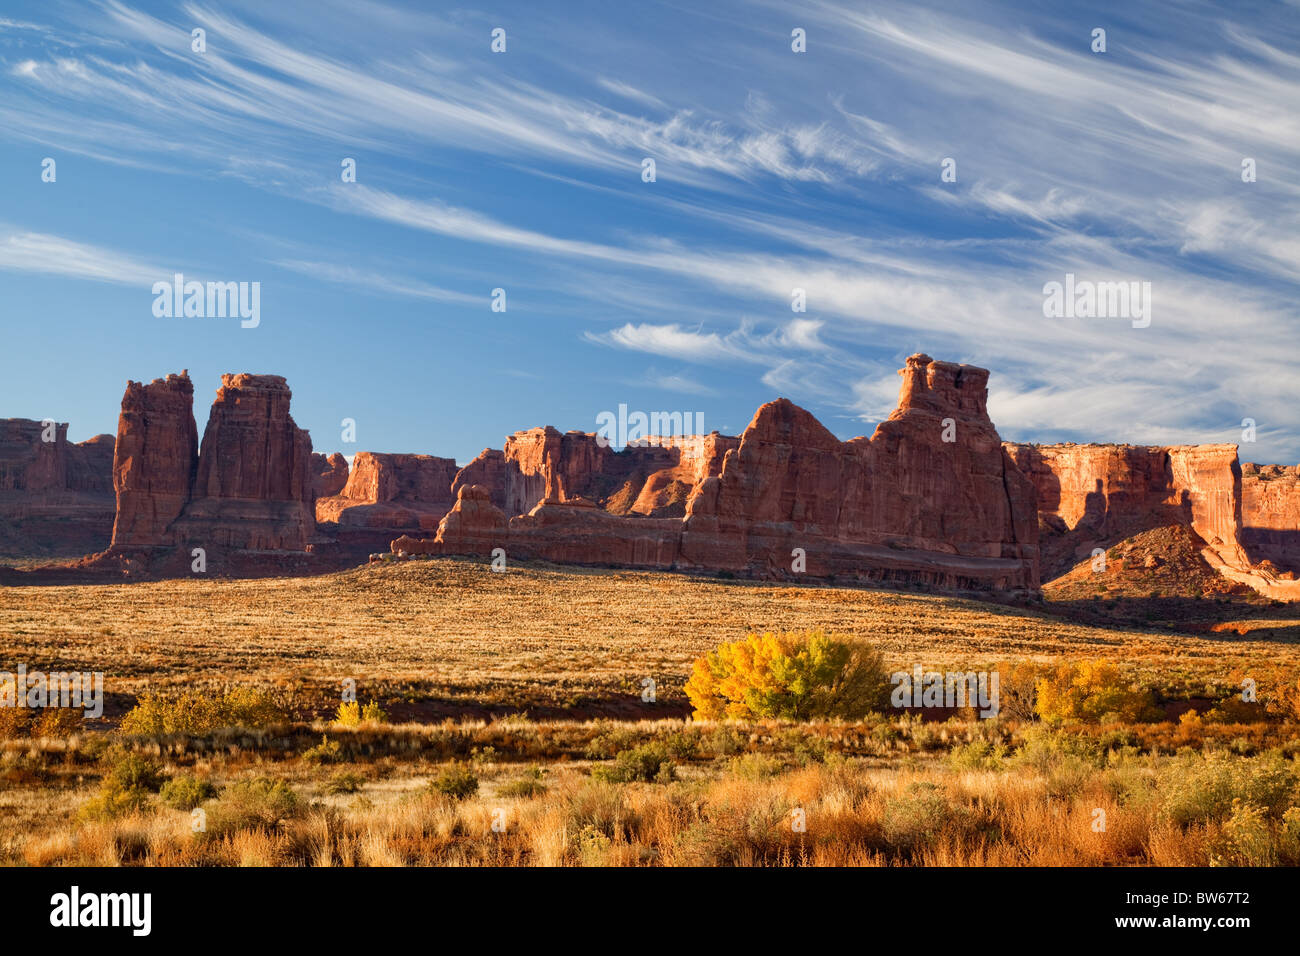 Courthouse Towers, Arches National Park, Utah Stock Photo